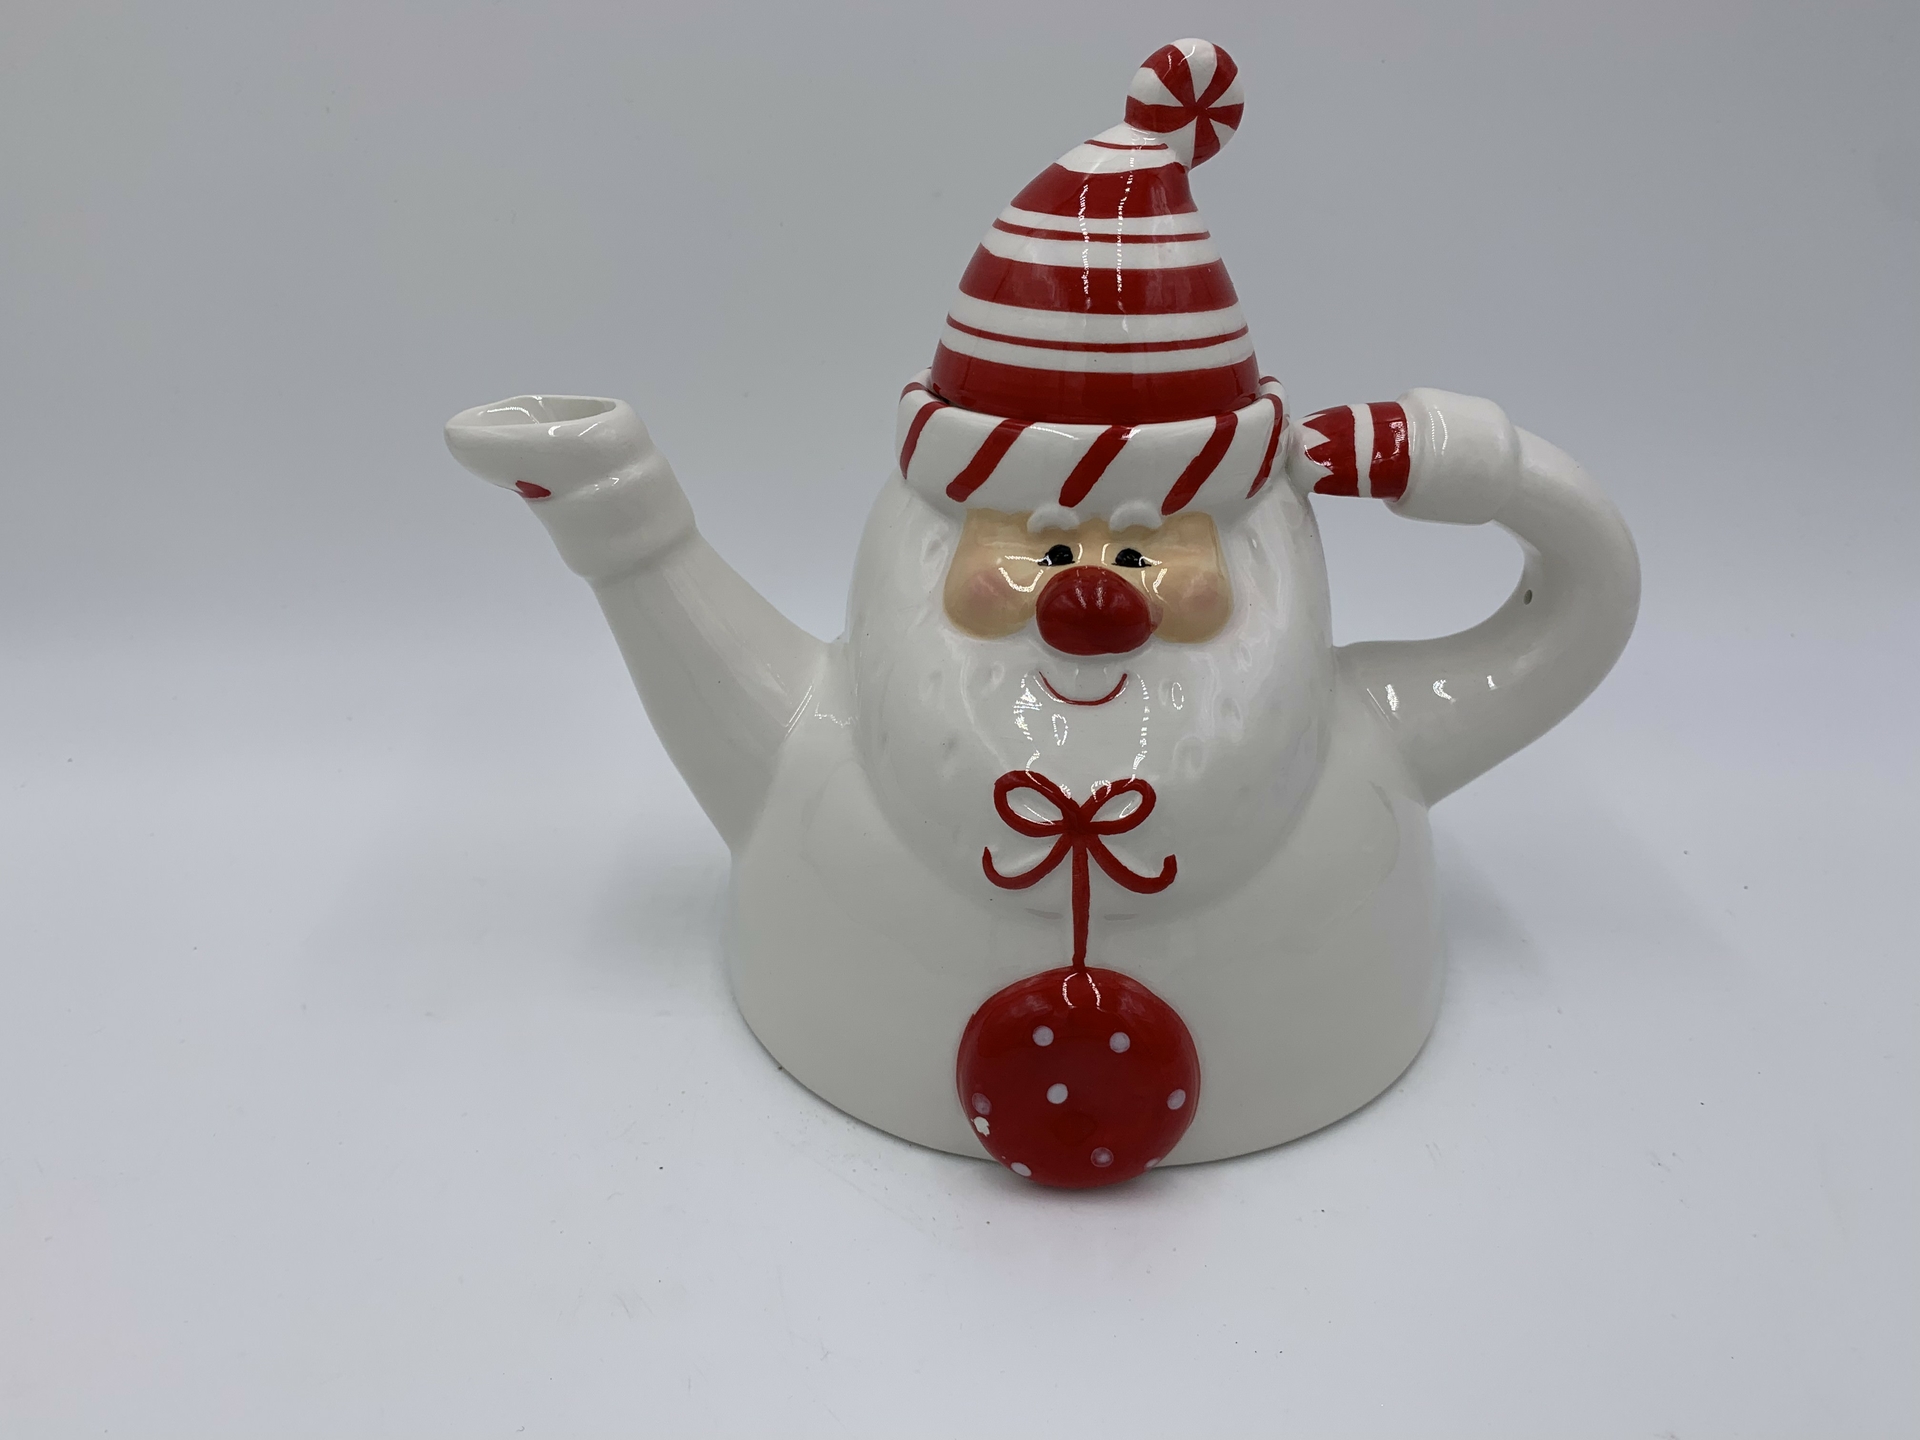 Theepot Kerstman wit rood 22,6 x 16 x 18 cm porselein | 251799 | Home Sweet Home